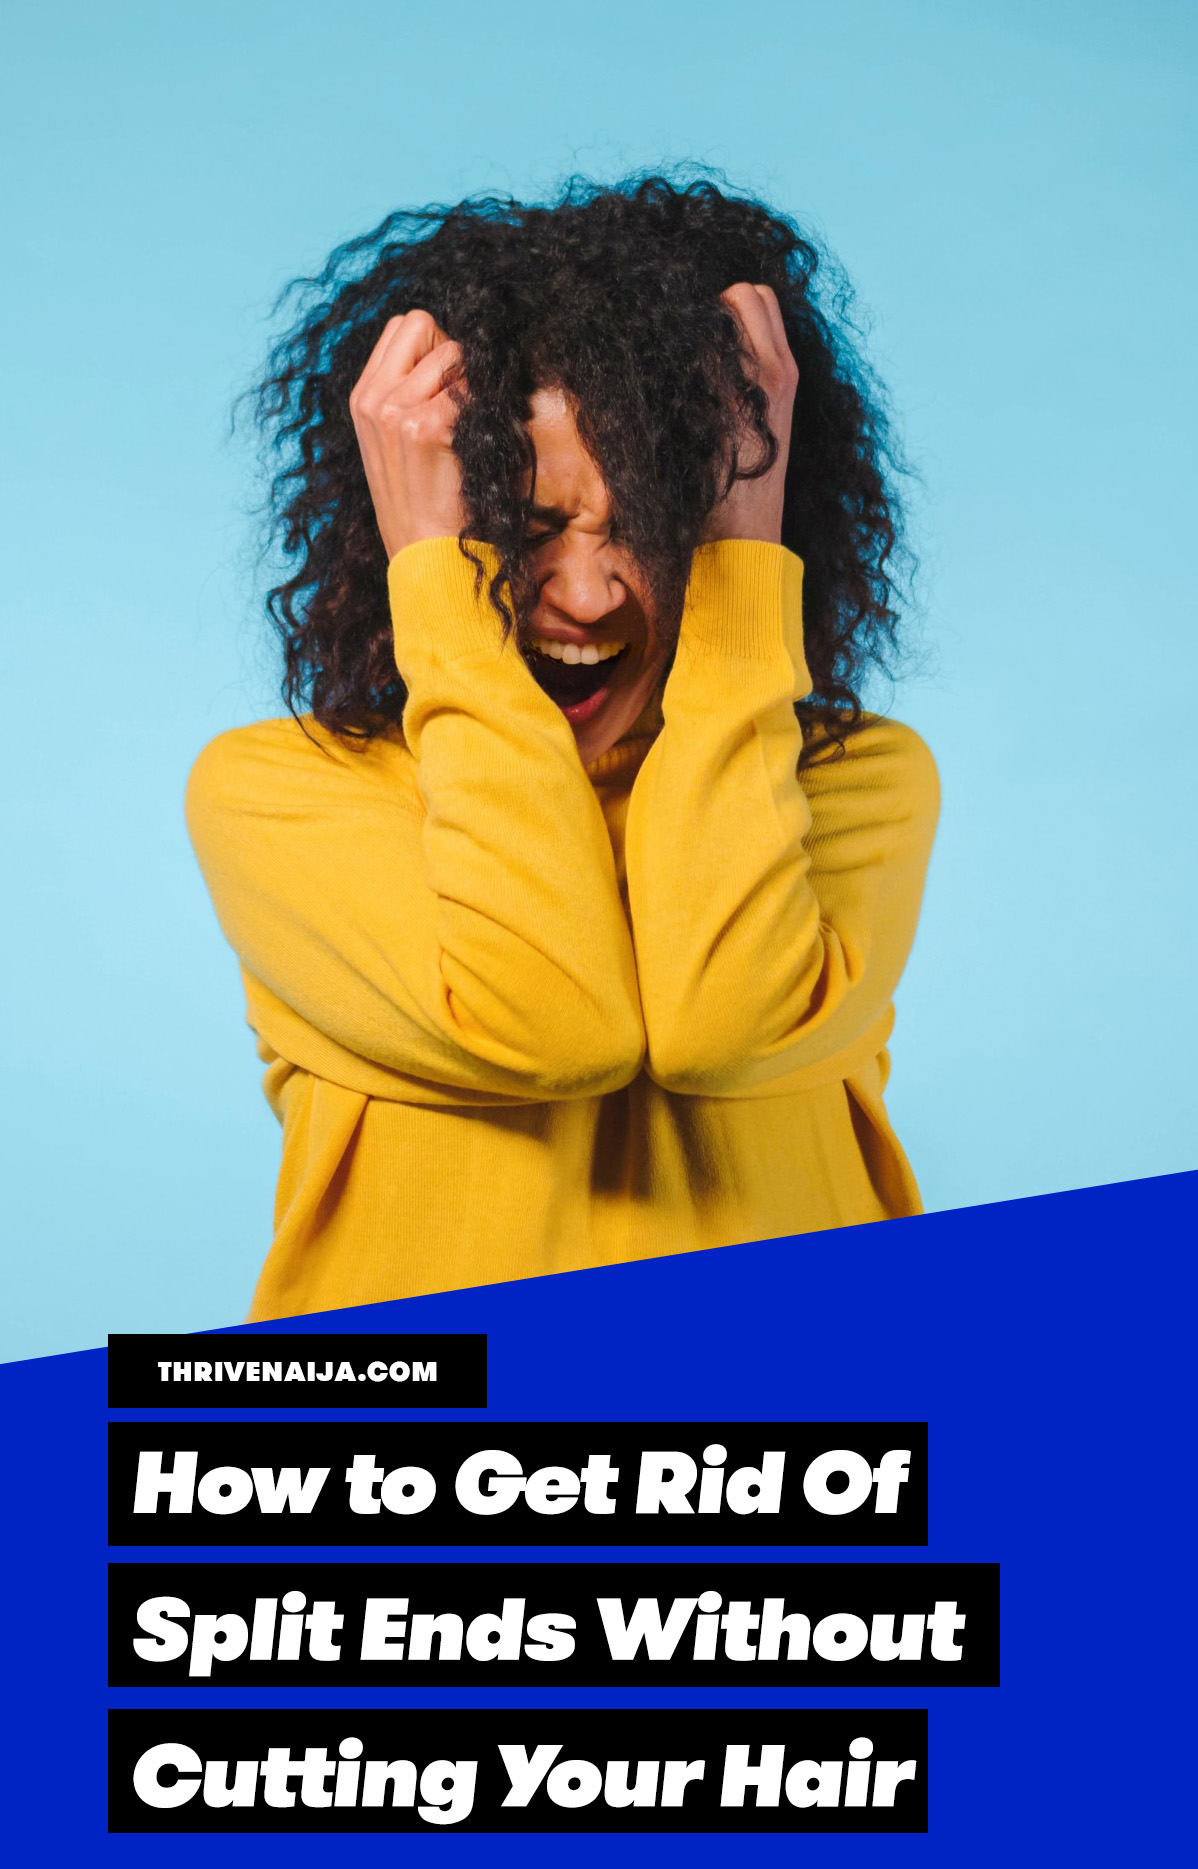 How To Get Rid Of Split Ends Without Cutting Your Hair | ThriveNaija